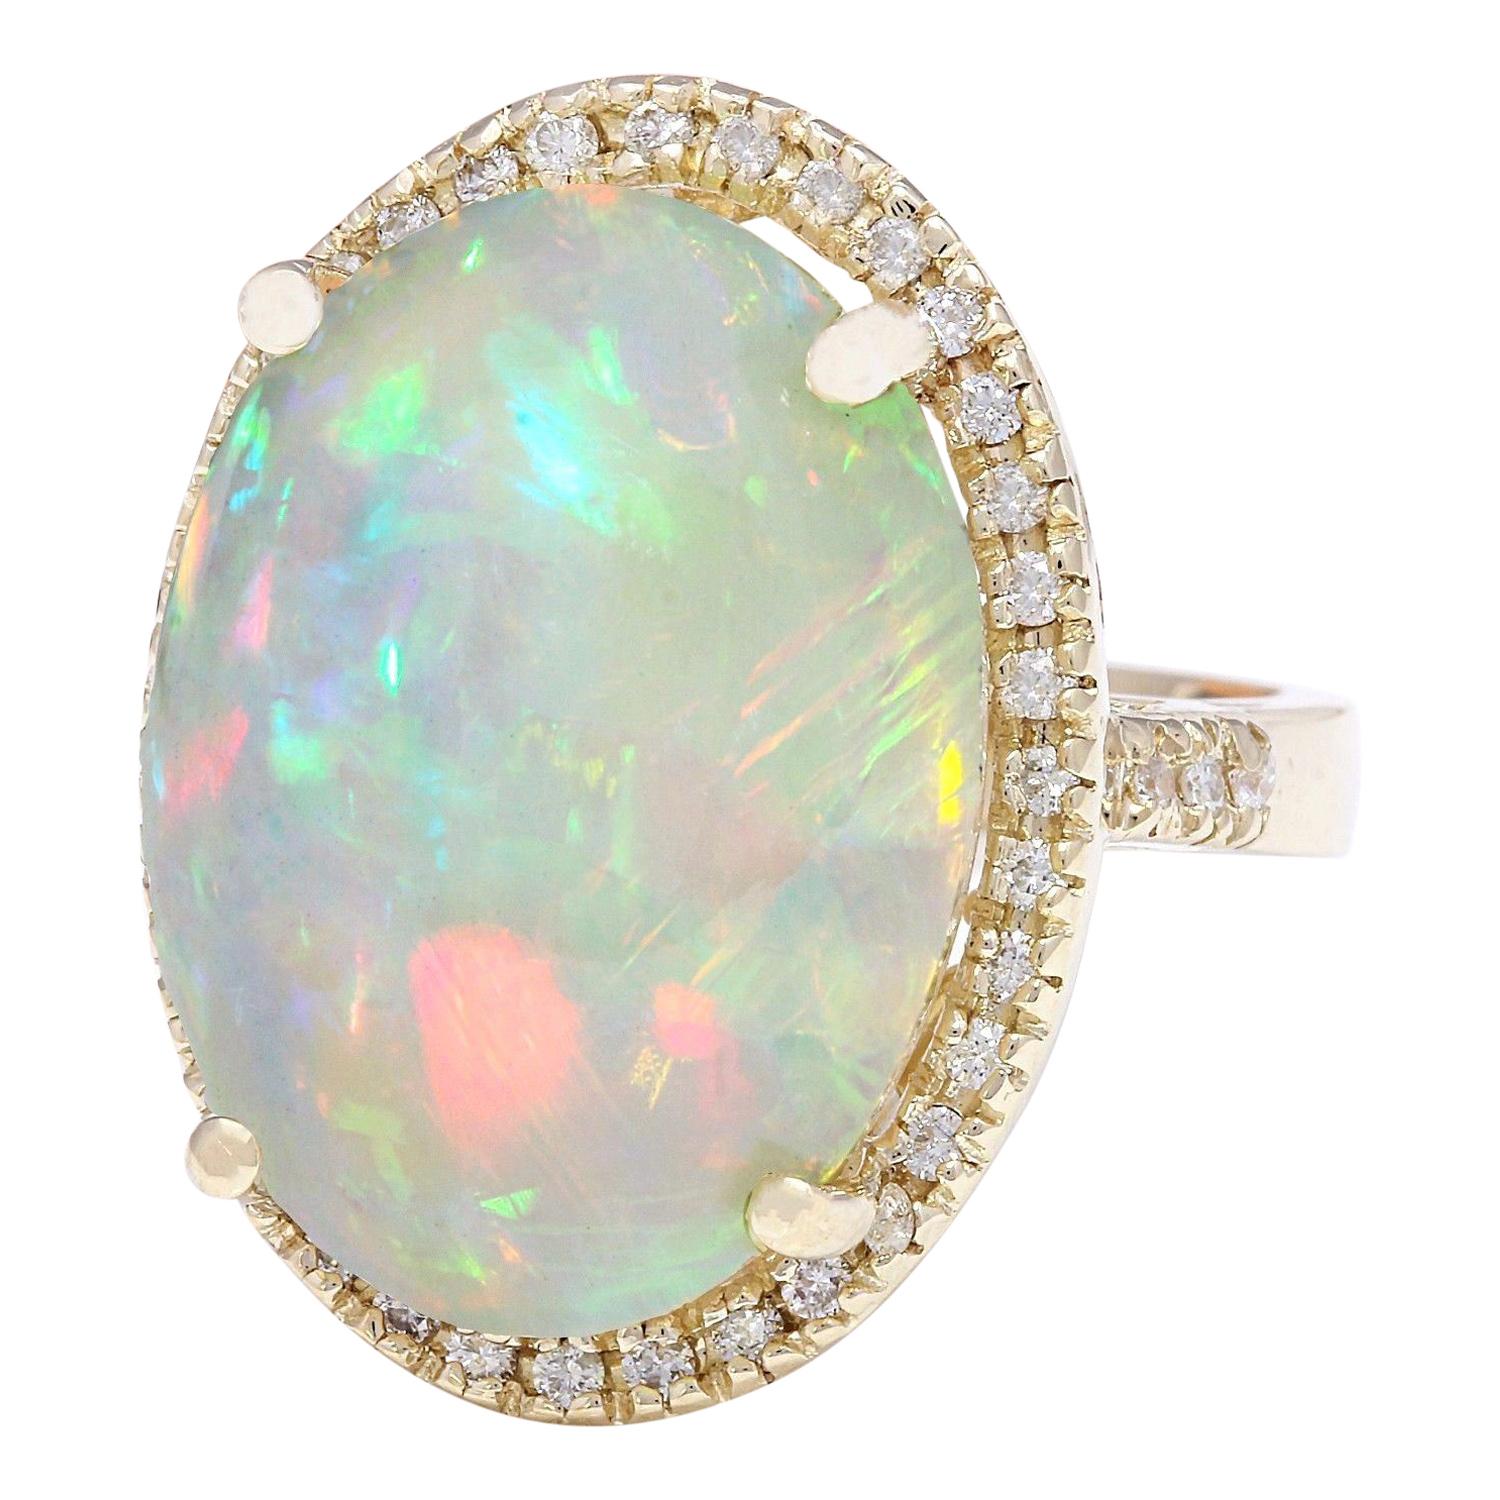 21.58 Carat Natural Opal 14K Solid Yellow Gold Diamond Ring
 Item Type: Ring
 Item Style: Cocktail
 Material: 14K Yellow Gold
 Mainstone: Opal
 Stone Color: Multicolor
 Stone Weight: 21.08 Carat
 Stone Shape: Oval
 Stone Quantity: 1
 Stone